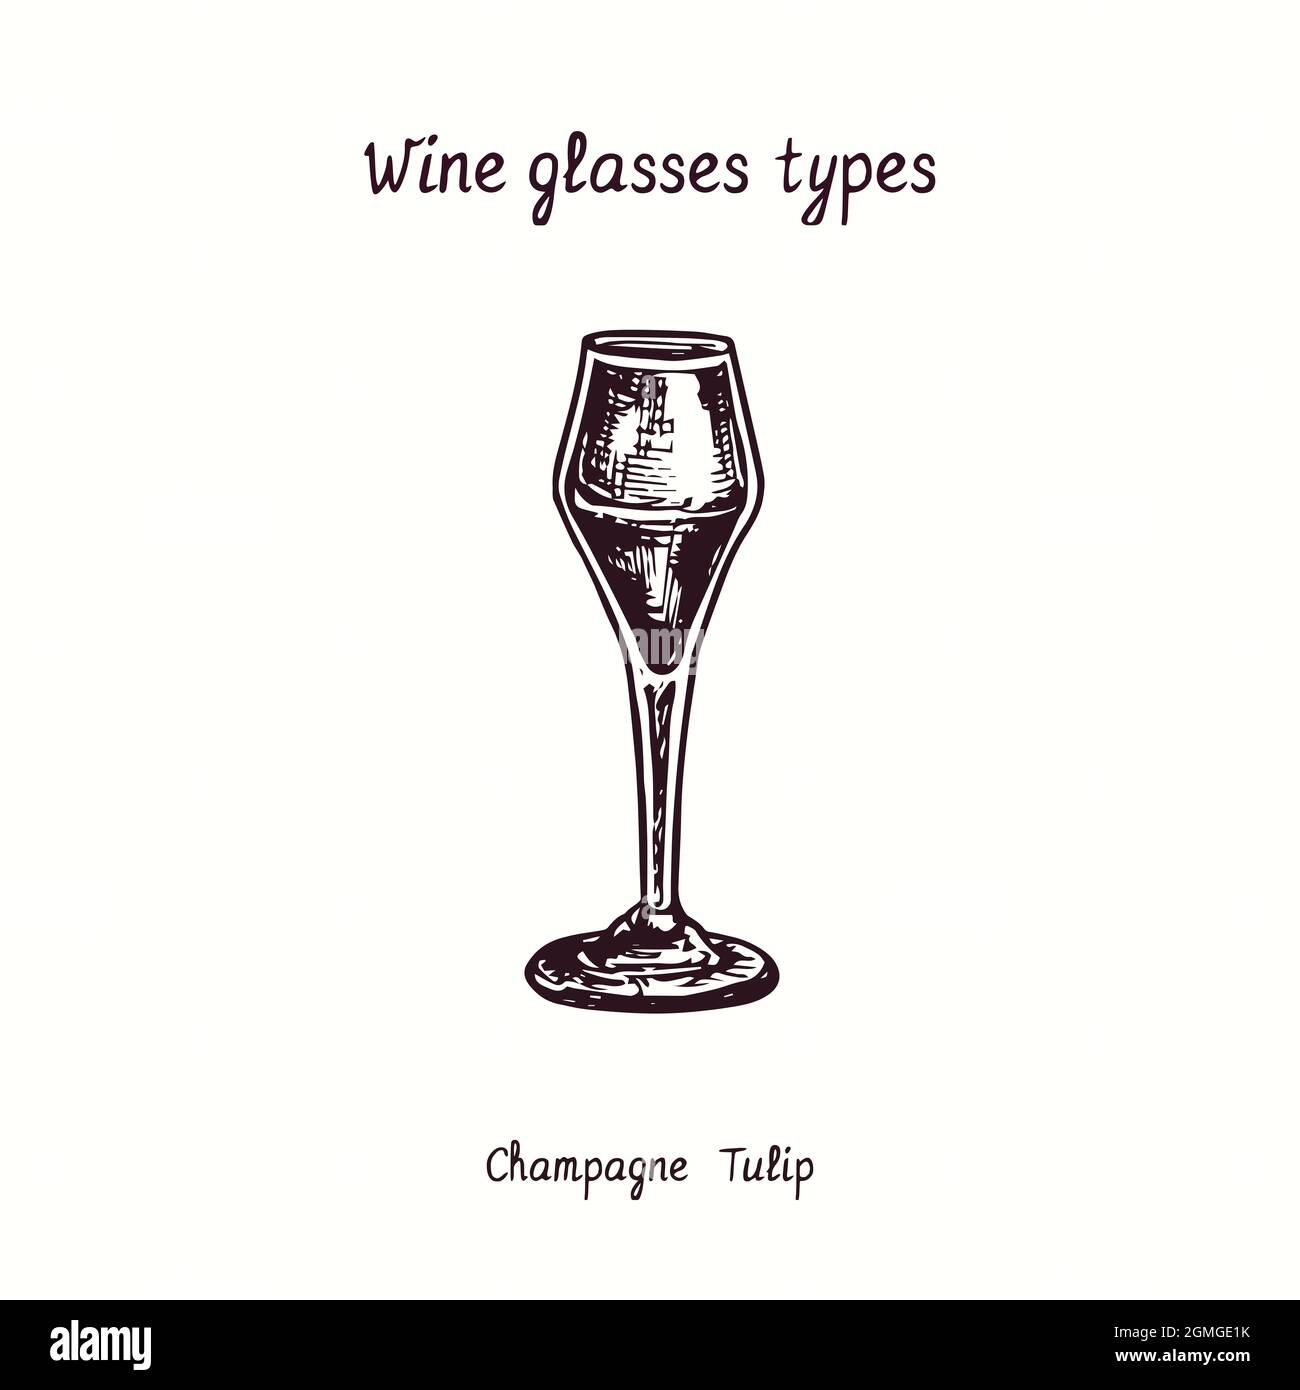 https://c8.alamy.com/comp/2GMGE1K/wine-glasses-types-collection-champagne-tulip-ink-black-and-white-doodle-drawing-in-woodcut-style-2GMGE1K.jpg